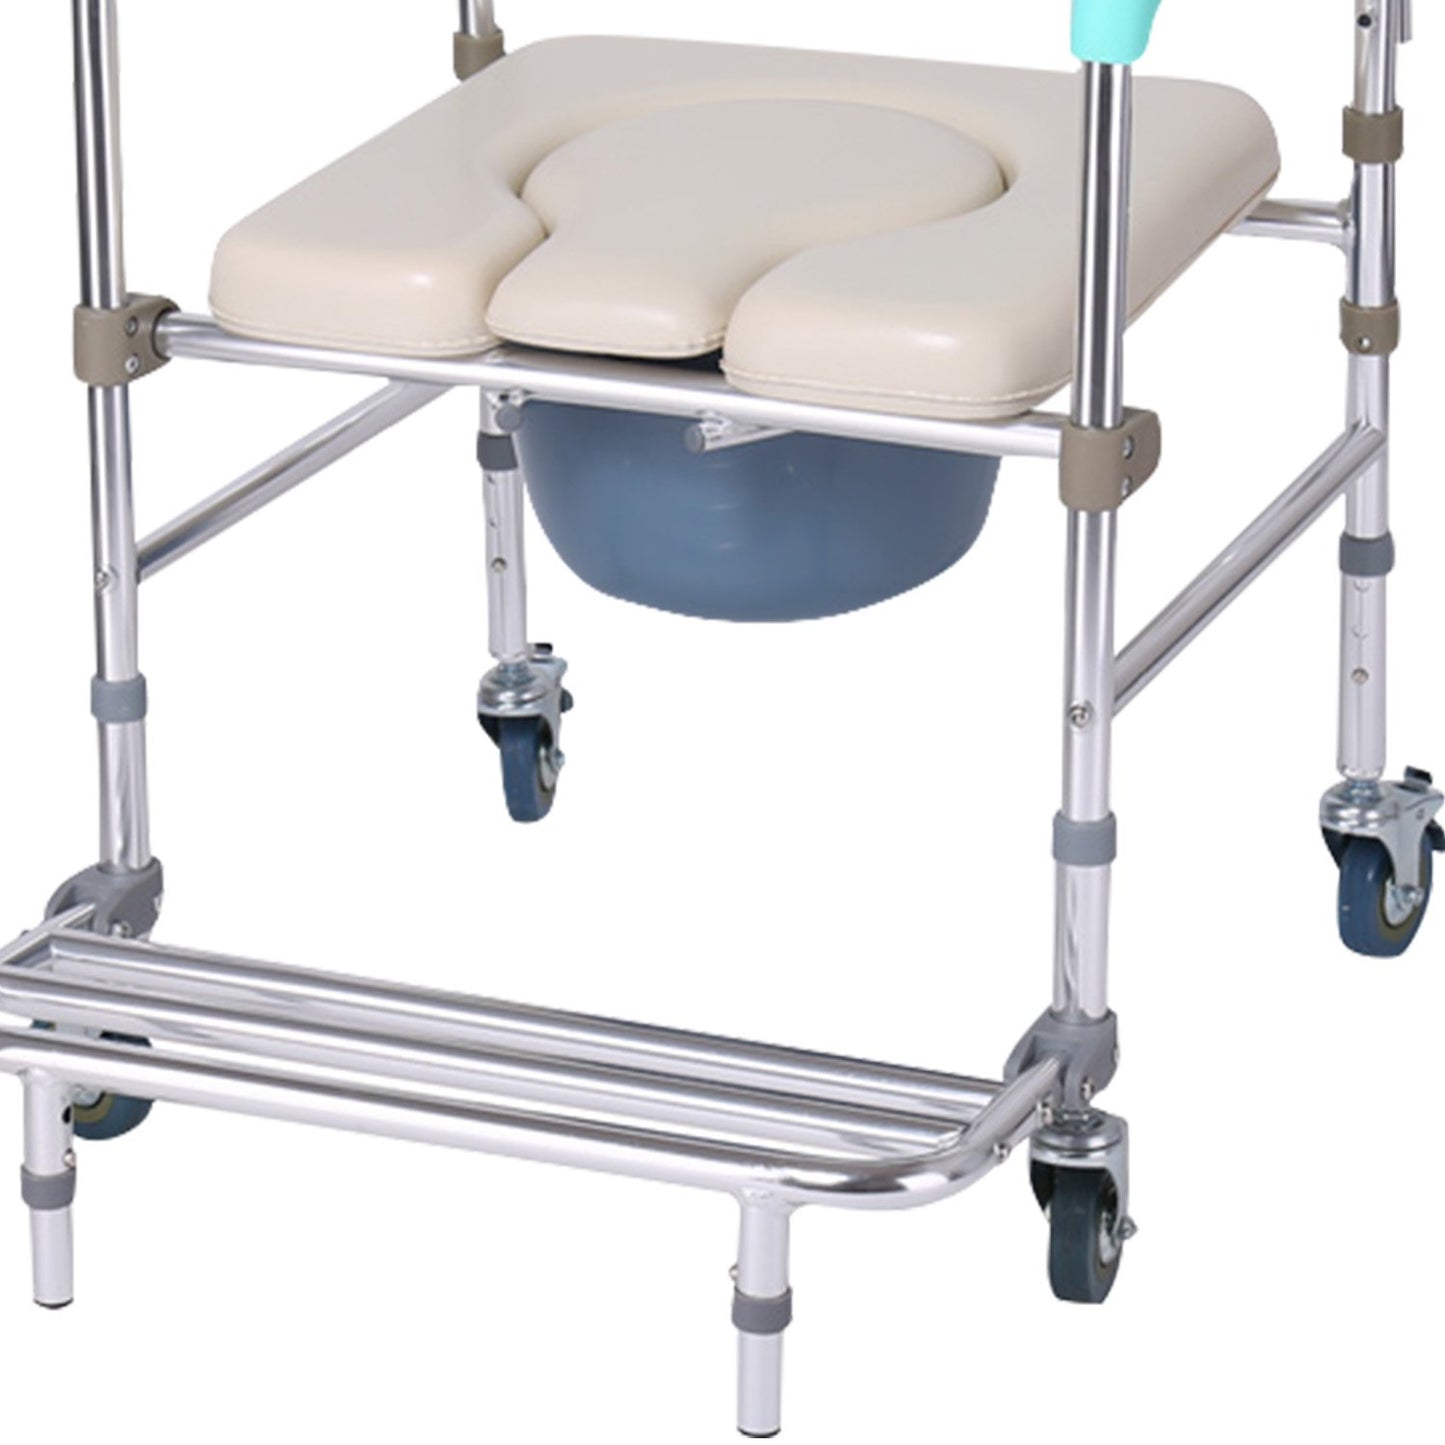 Orthonica Commode Chair With Castors Aluminium Frame Footrest Soft Push Handles